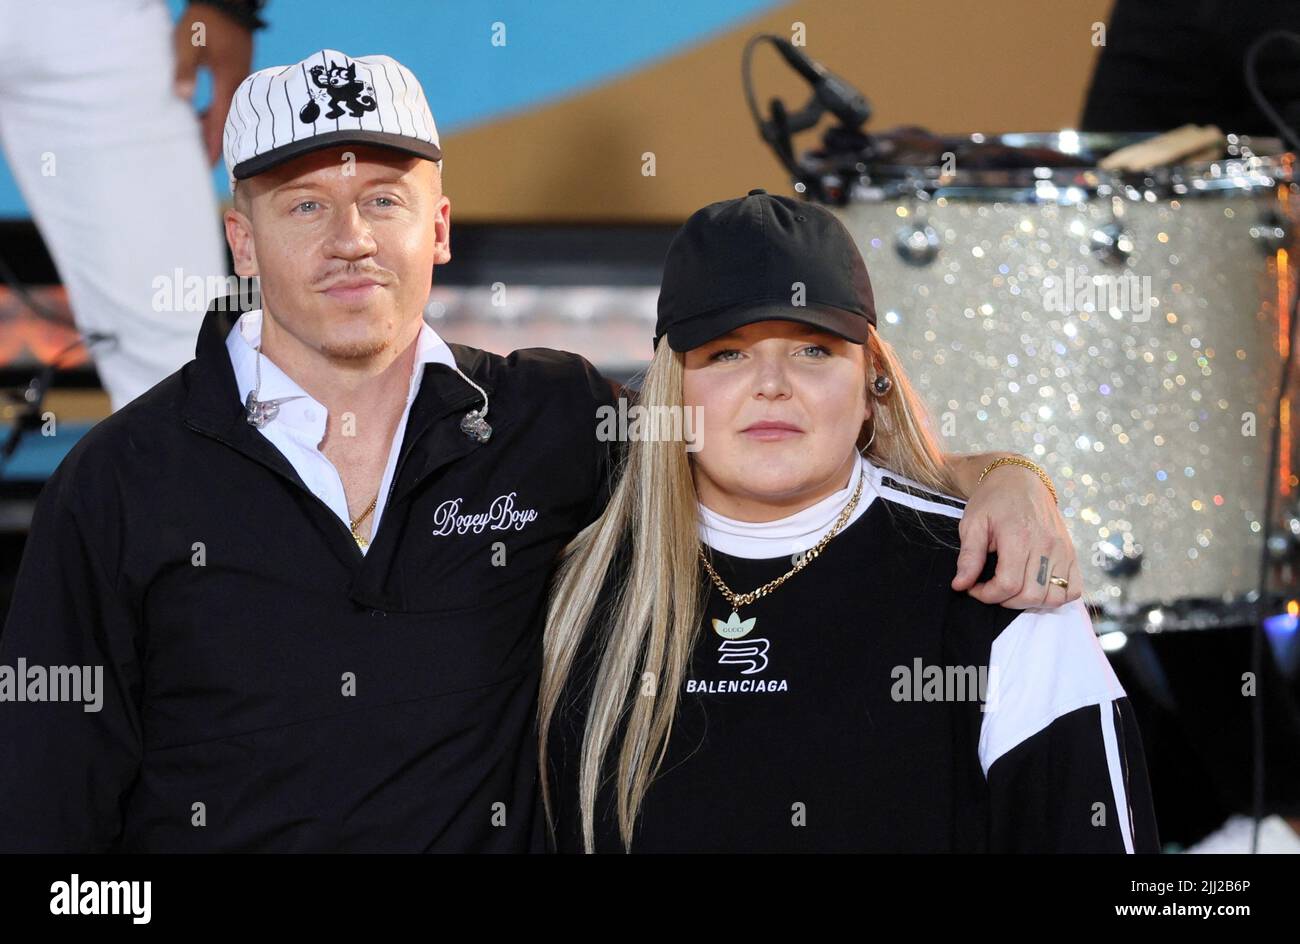 Singers Macklemore and Tones & I pose together during an appearance on ABC's 'Good Morning America' show in New York City, U.S., July 22, 2022.  REUTERS/Brendan McDermid Stock Photo